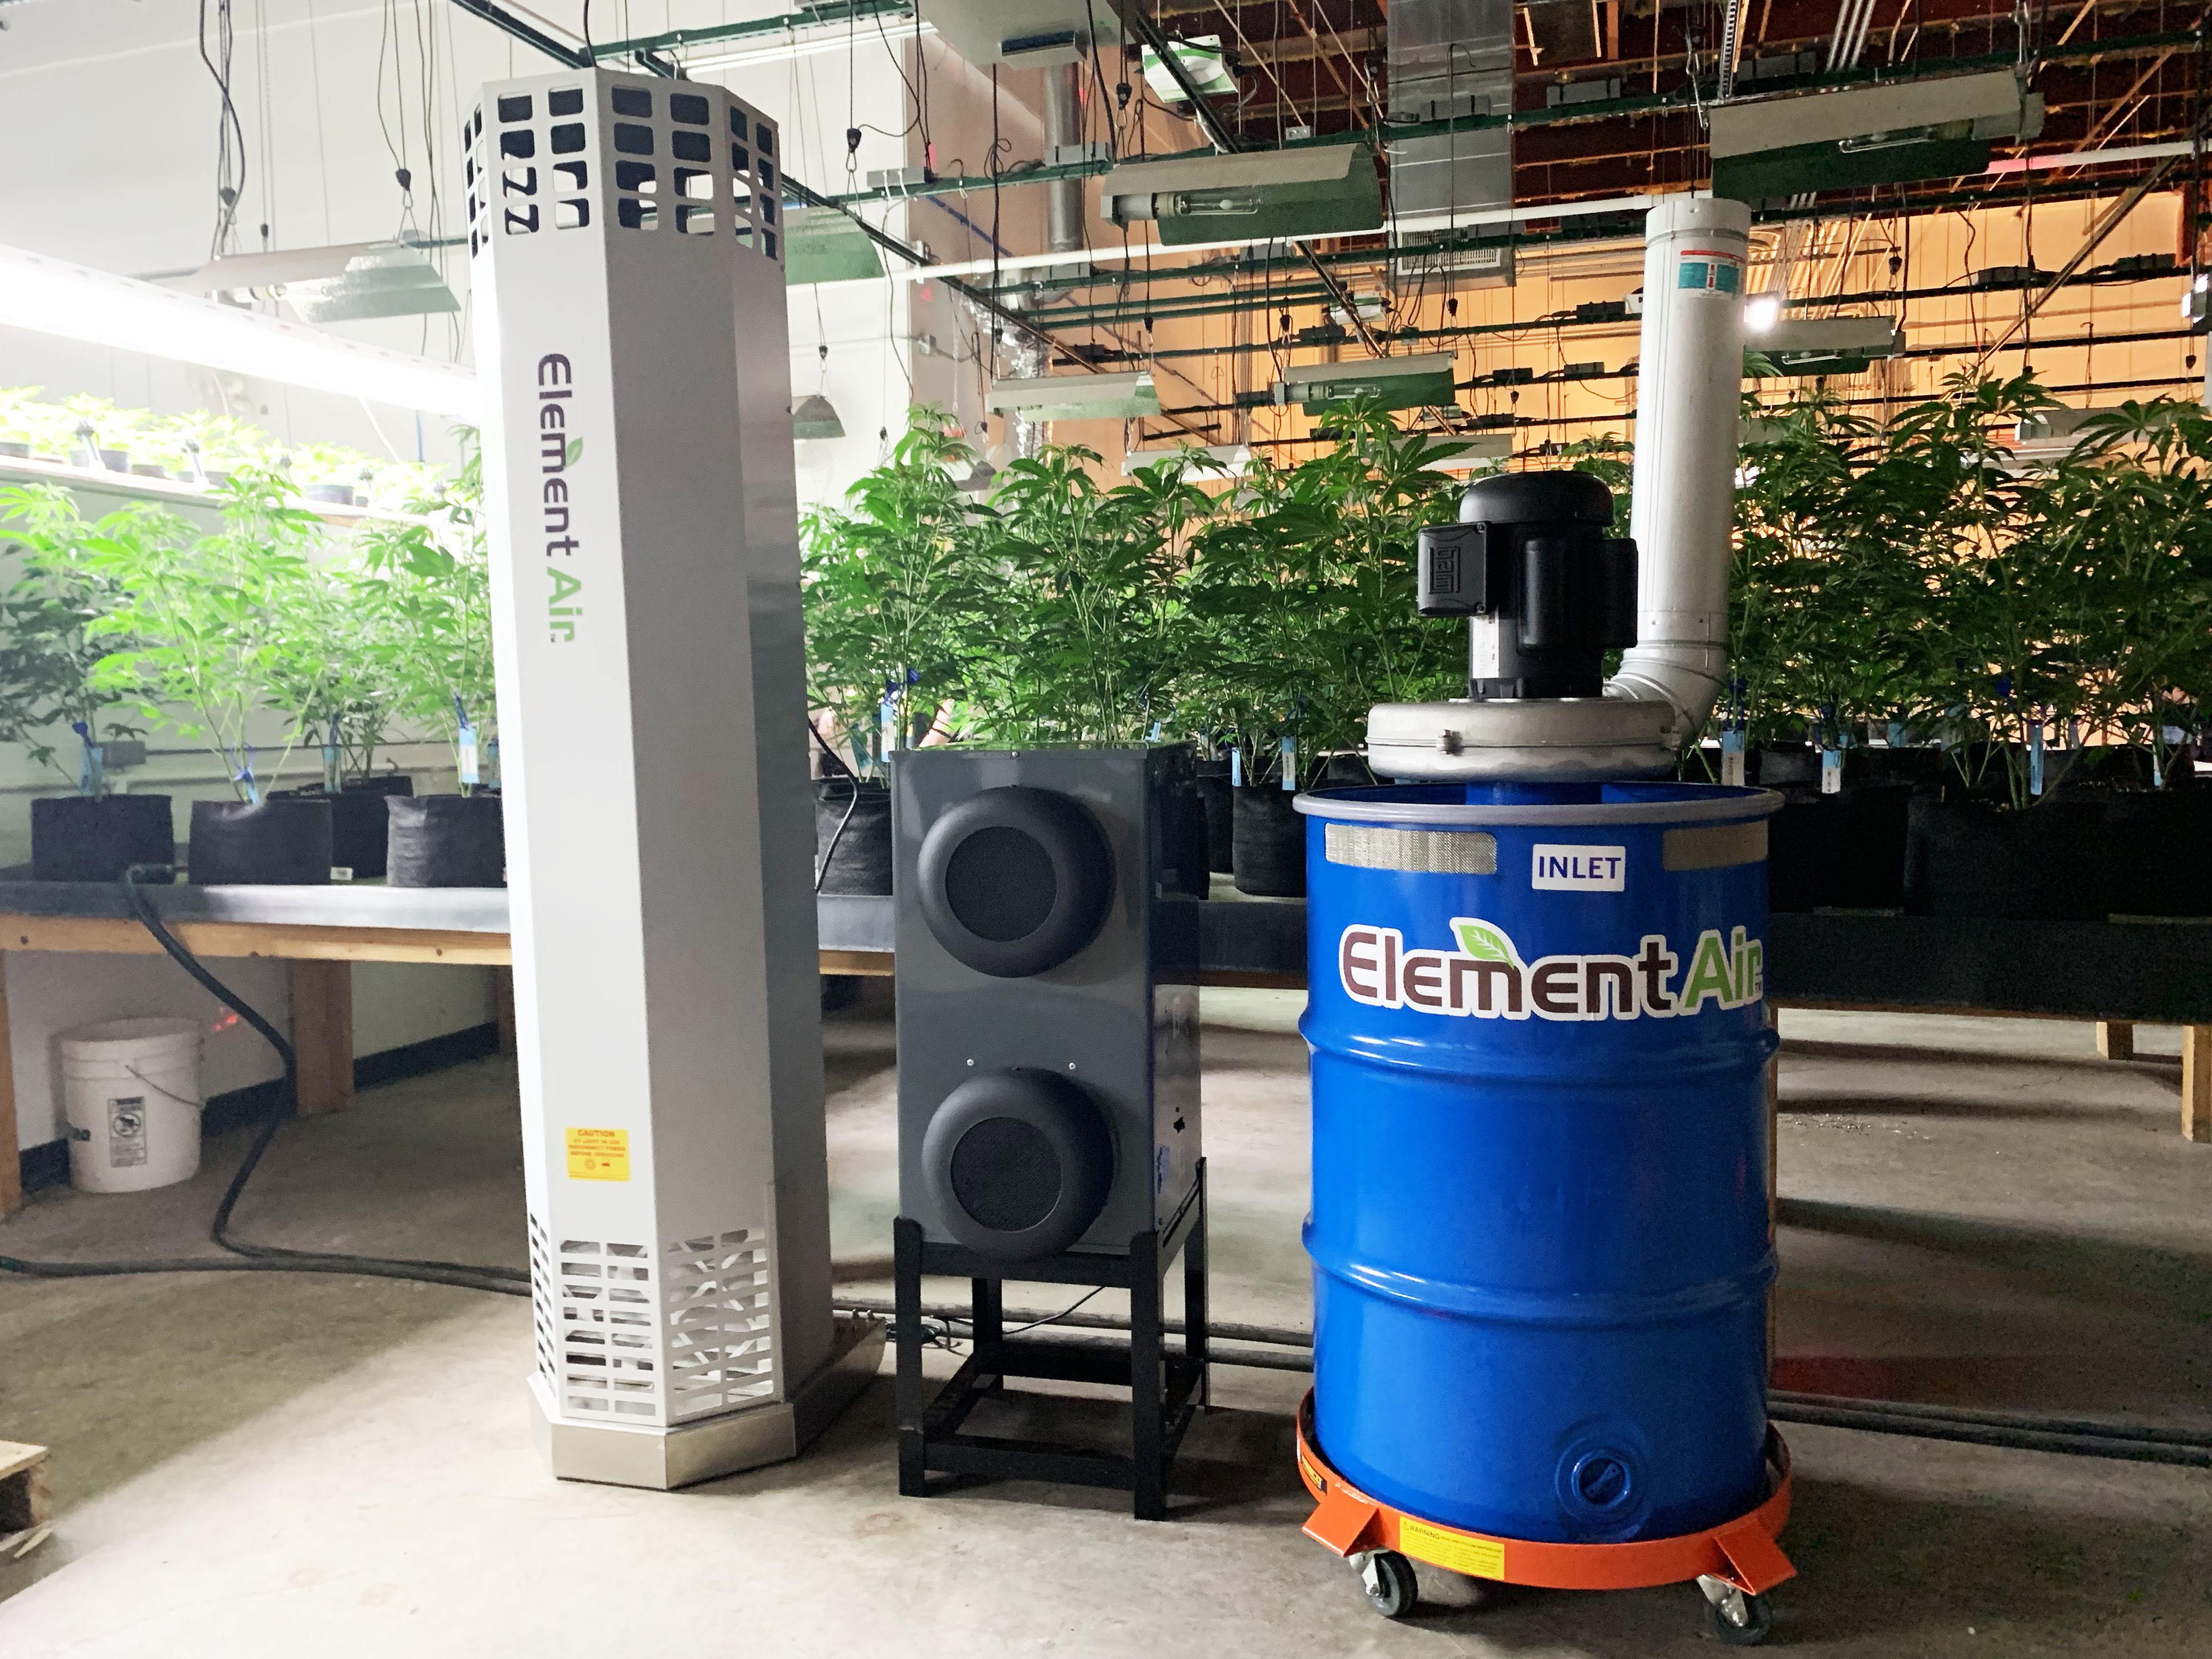 Director of Environmental Sciences, Todd Statzer spoke with MJBiz magazine about odor and microbial control for commercial cannabis cultivations